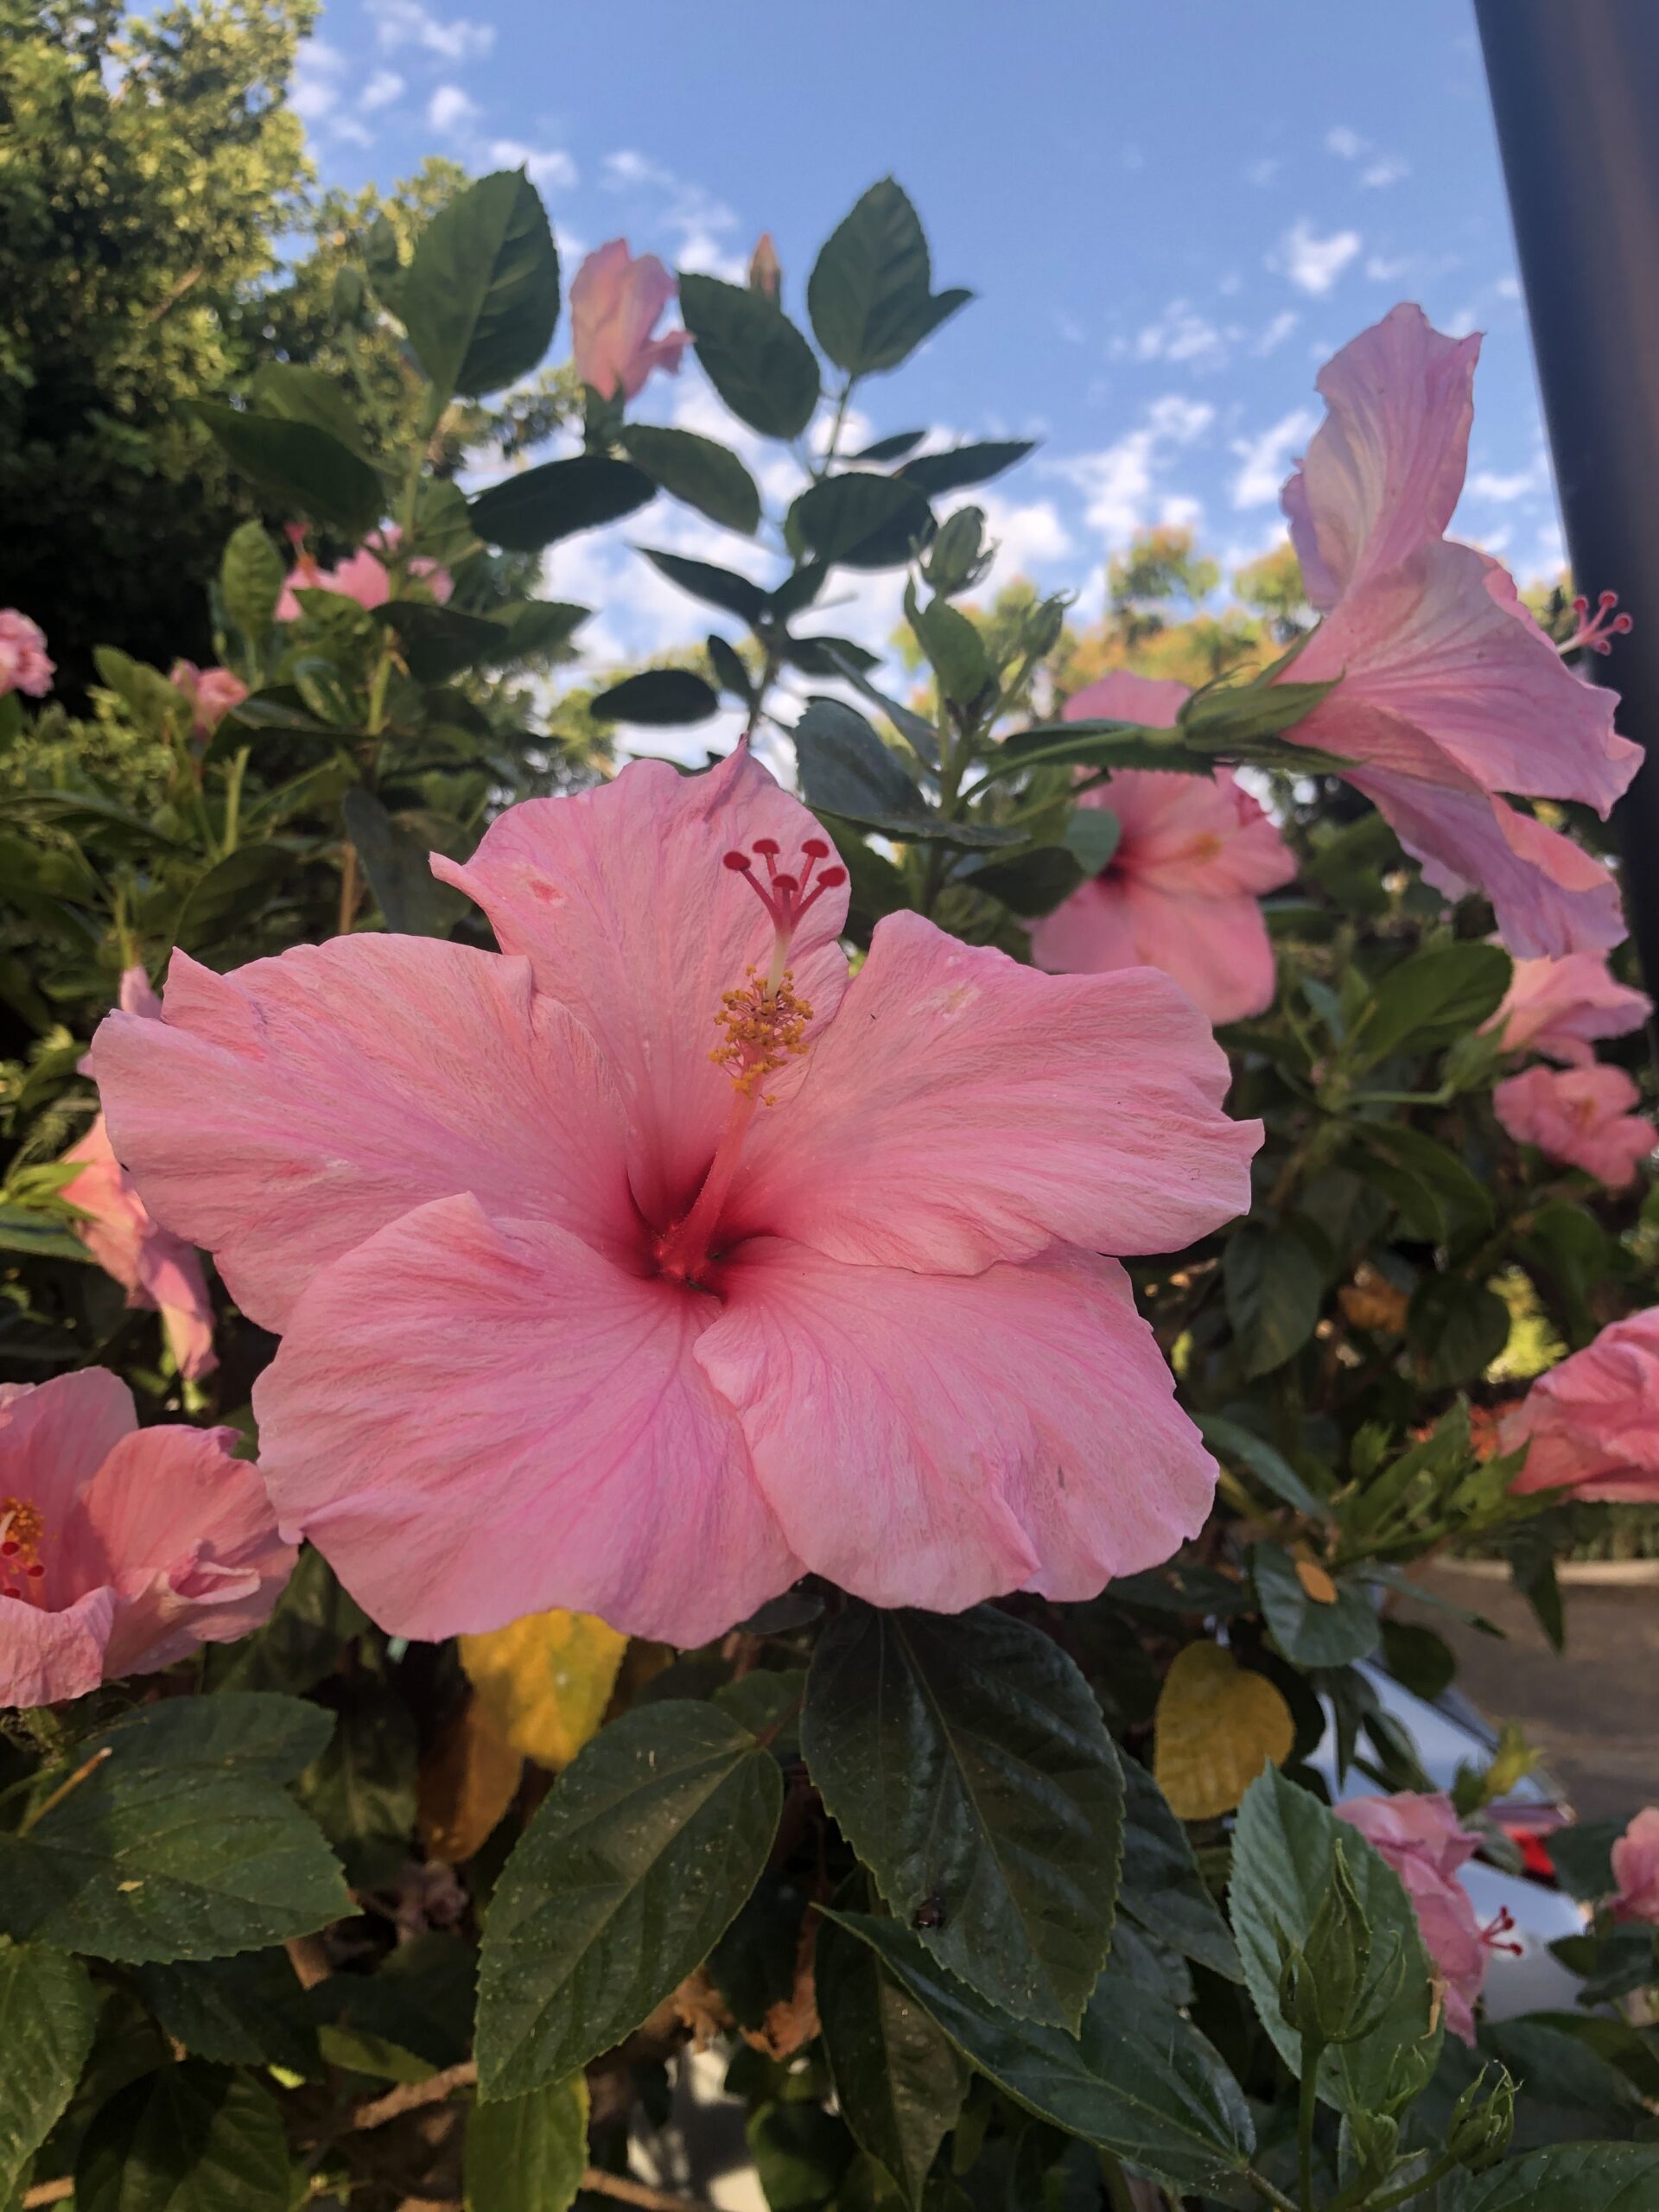 Hibiscus Flowers: A Colorful Addition to Your Garden